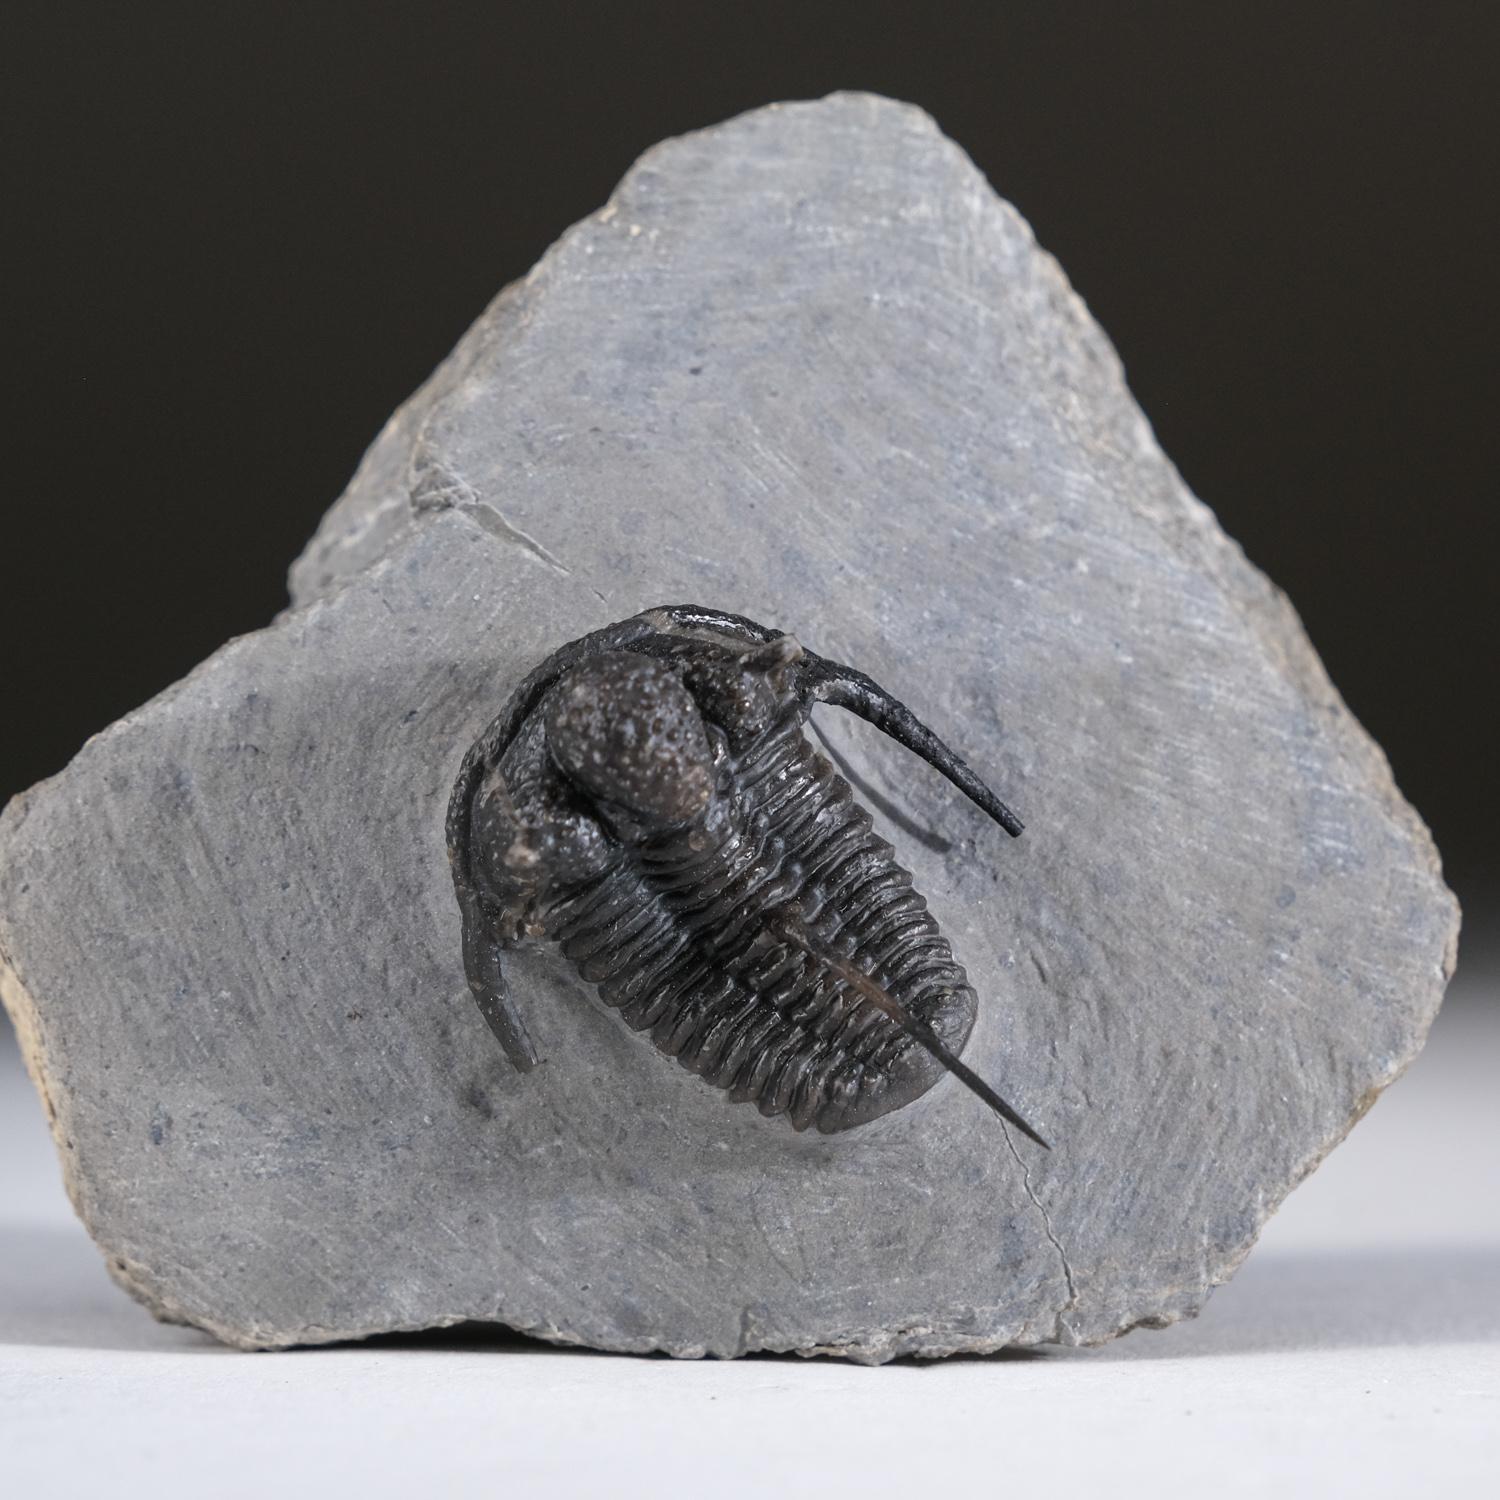 Trilobites, an early arthropod relative of spiders, horseshoe crabs, and scorpions, preserved in this level of detail only occurred as a result of very sudden underwater landslides called turbidite sequences, which ravaged the early earth when the